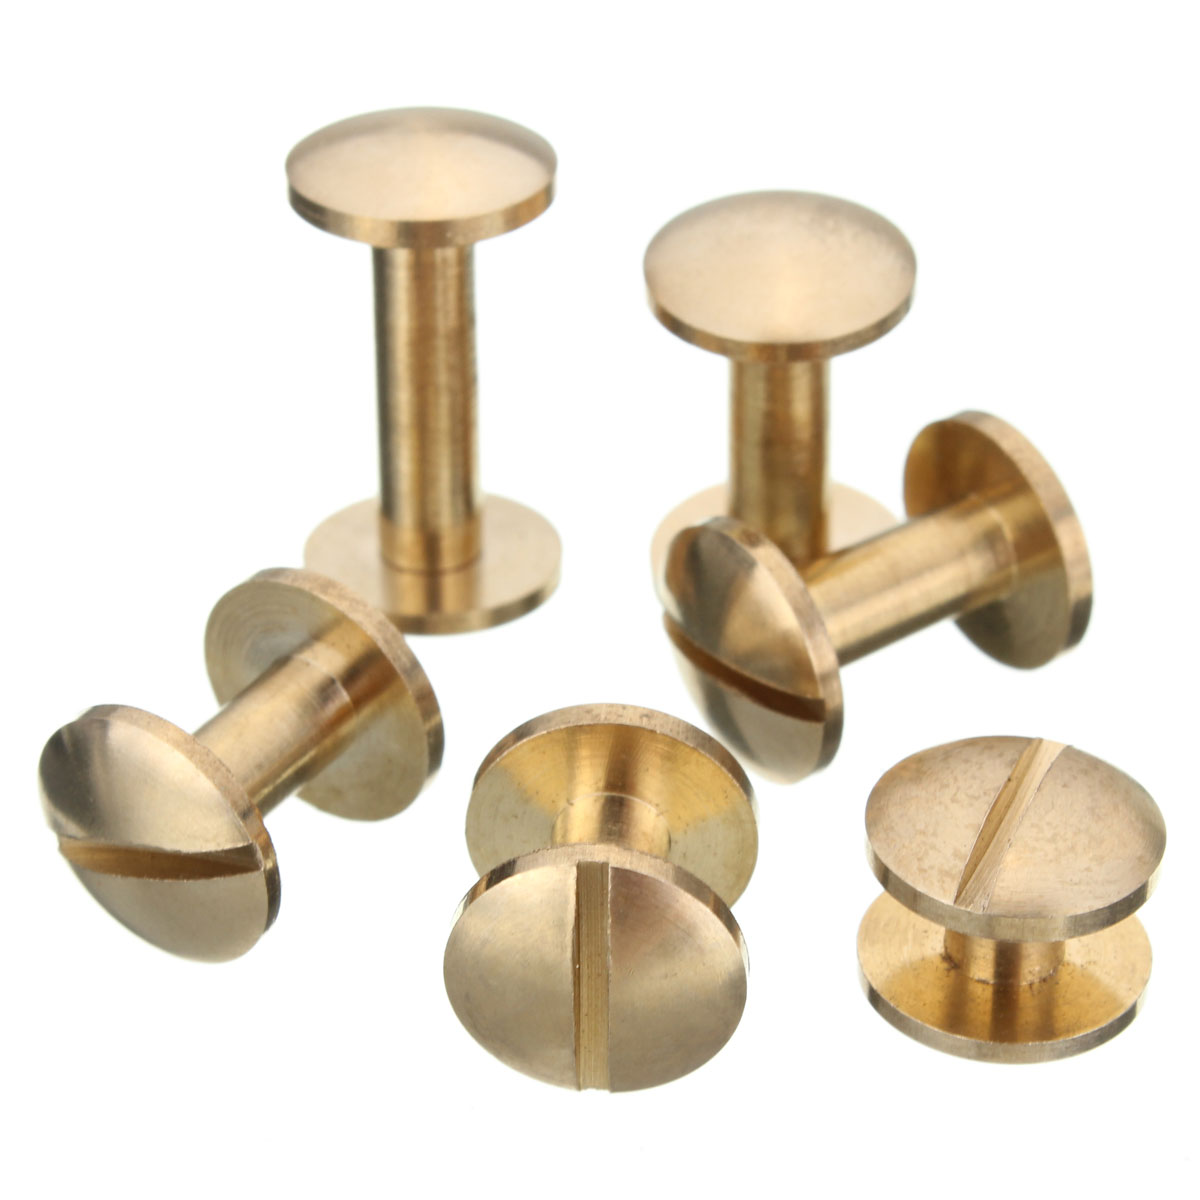 Solid-Brass-Arc-Button-Stud-Screw-Nail-4-15mm-Screw-Back-Leather-Belt-Button-Screws-1034256-4